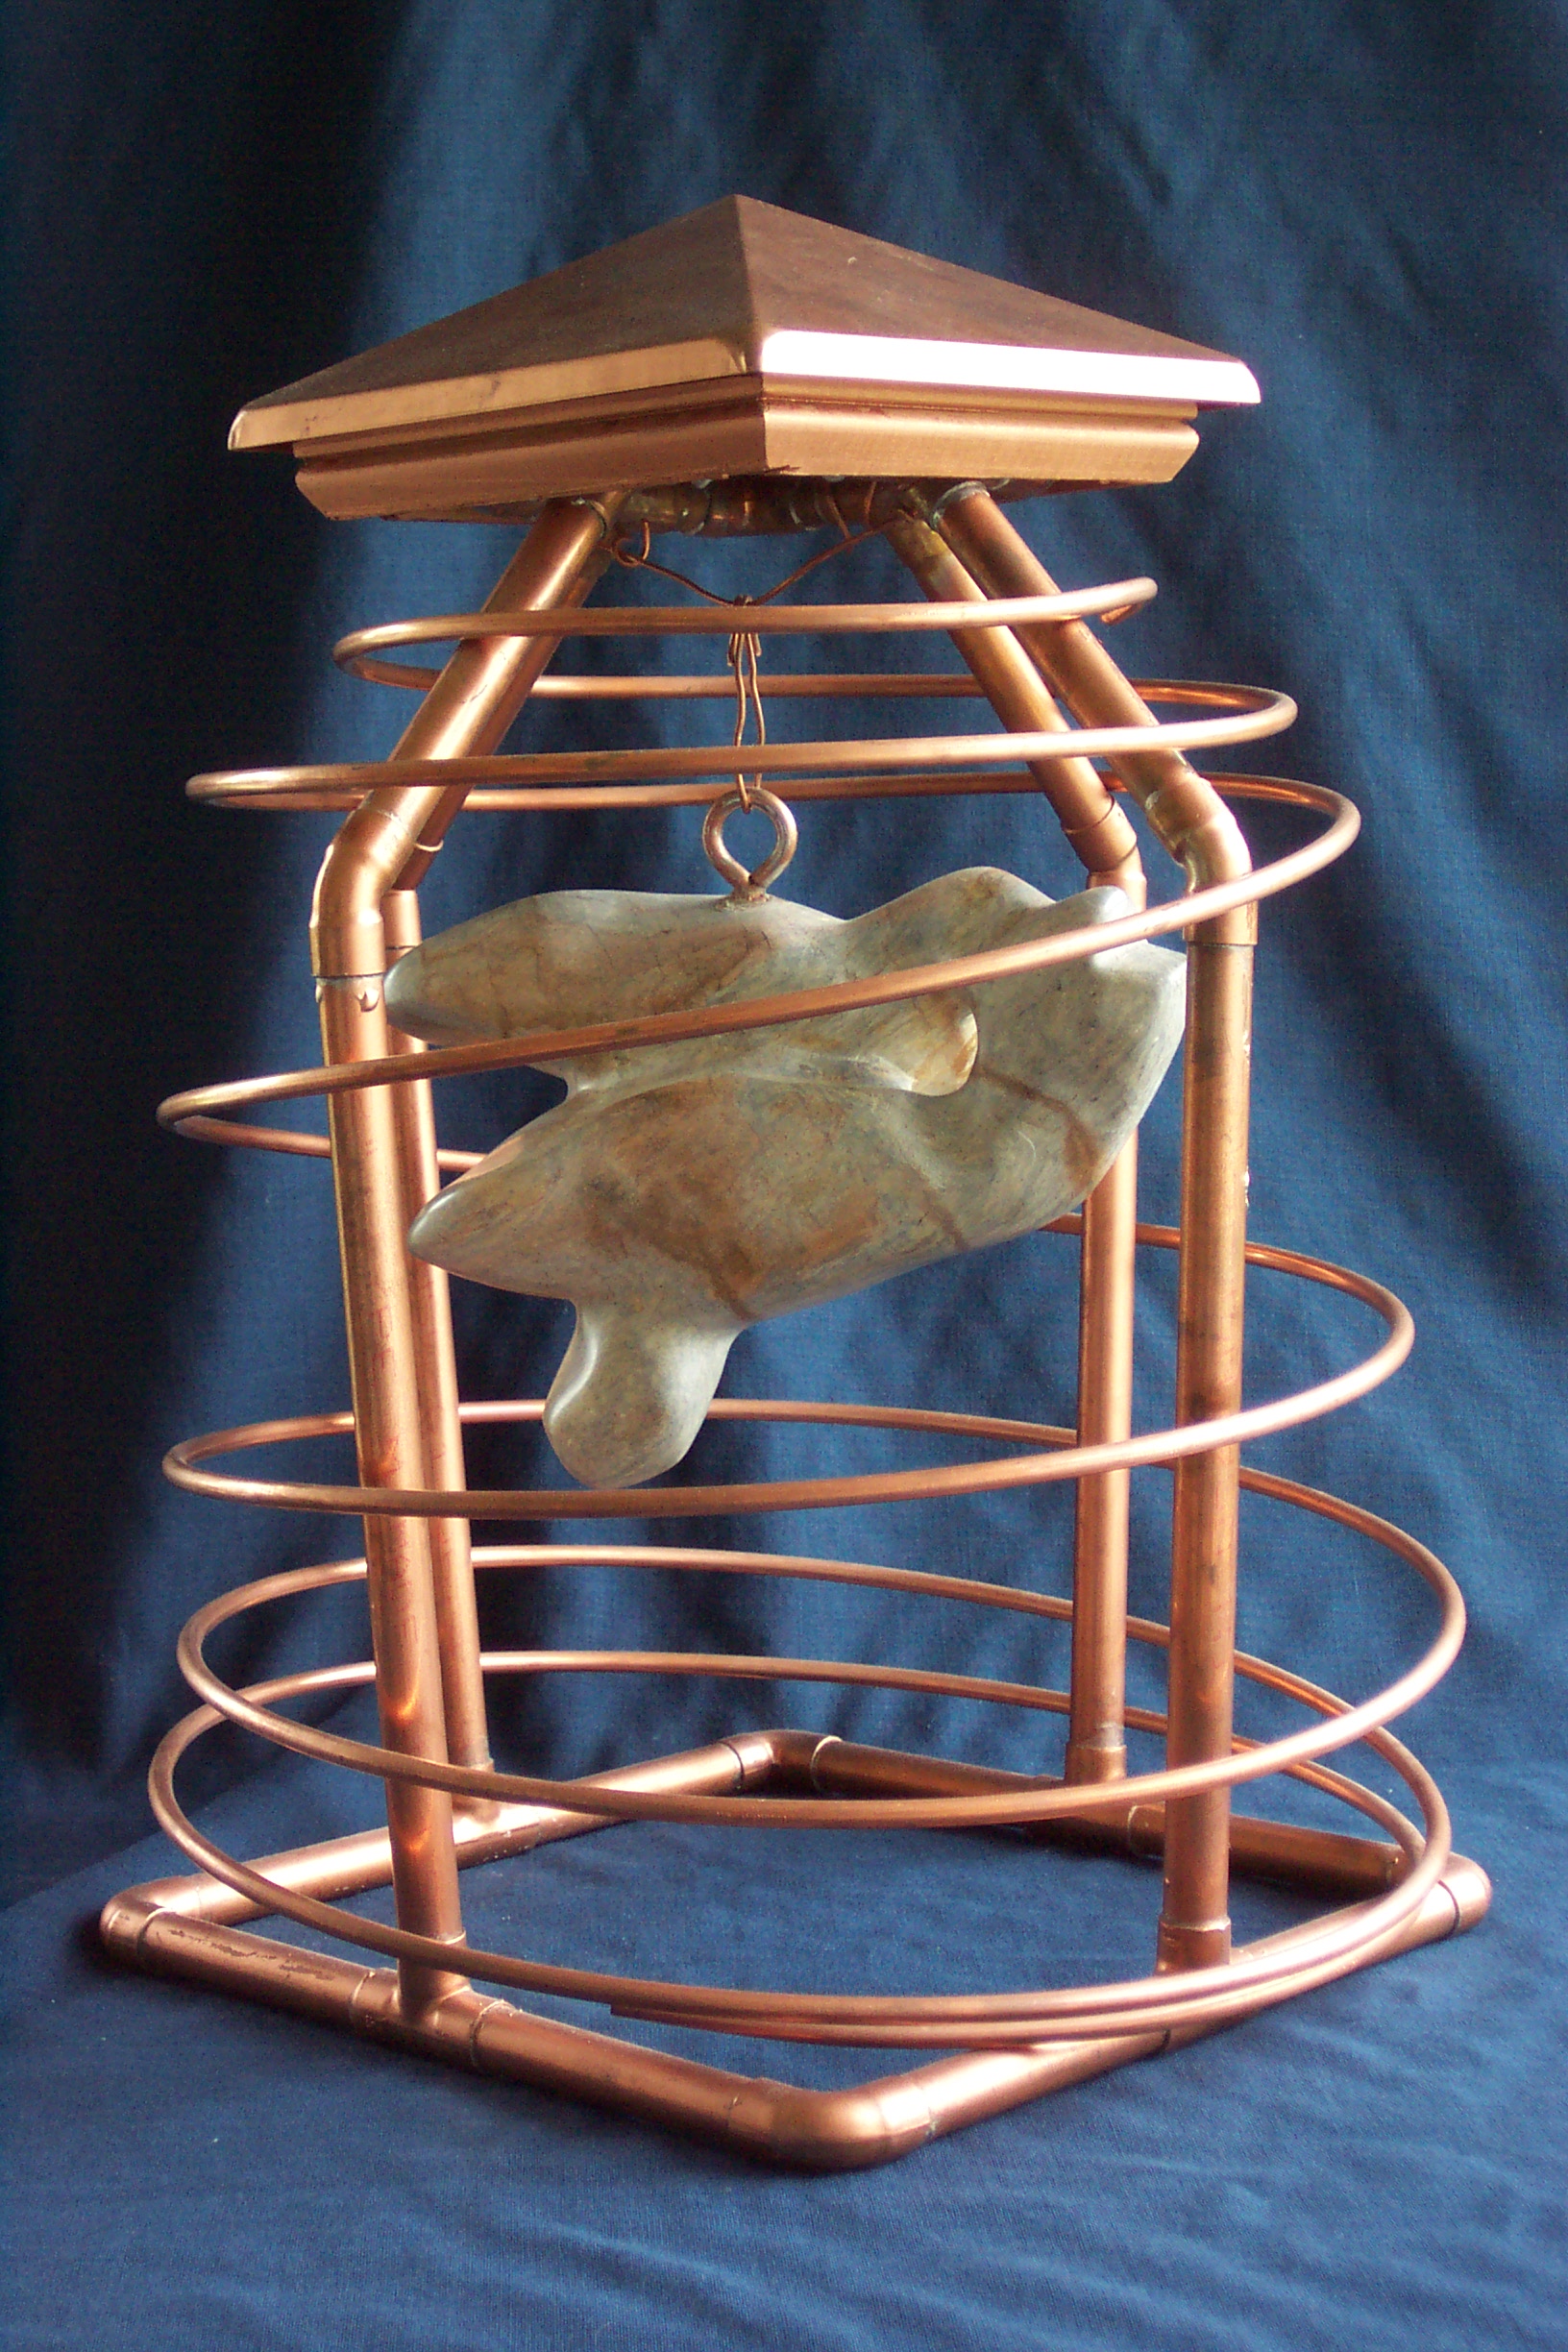 Patty McPhee “Caged Bird Sings”,11” X 11” X 20”, soapstone and copper